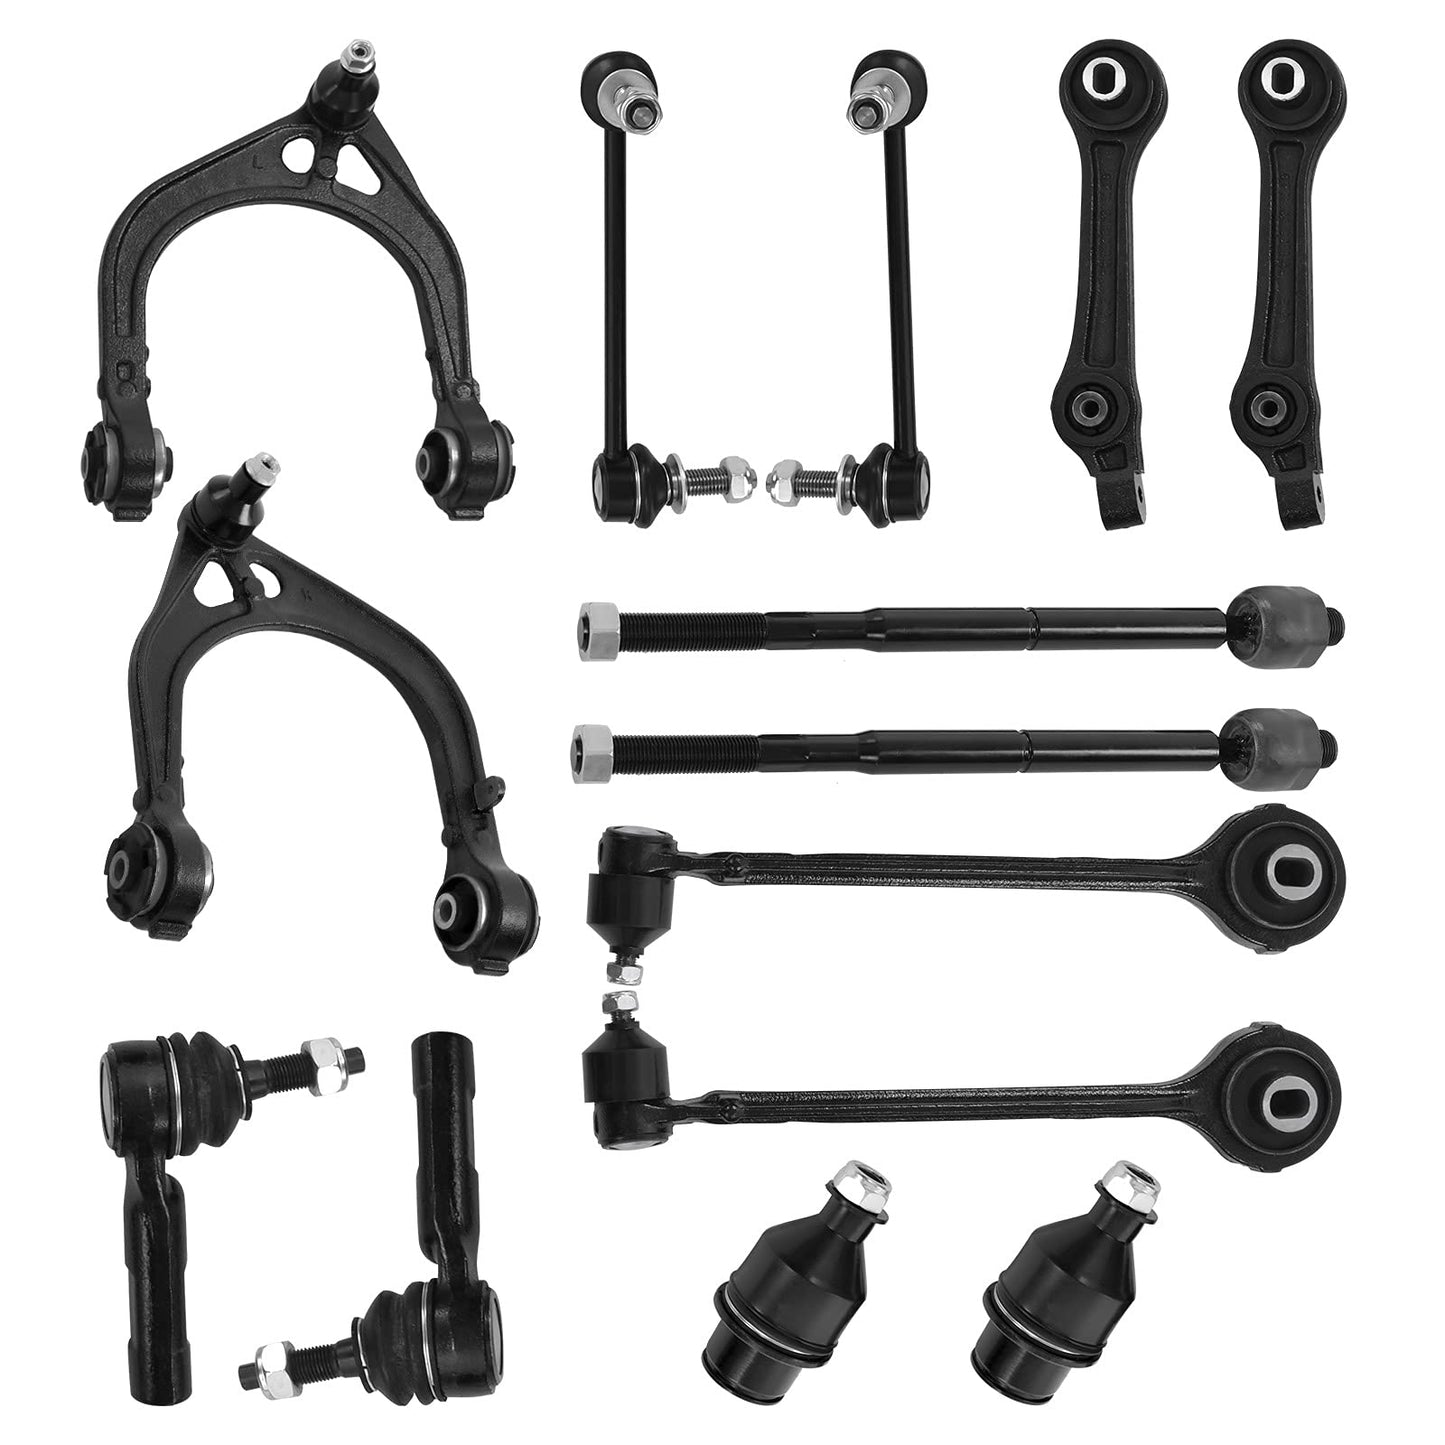 GARVEE 14pc Front Upper Control Arms Ball Joint Tie Rod Front Suspension Steering Kit